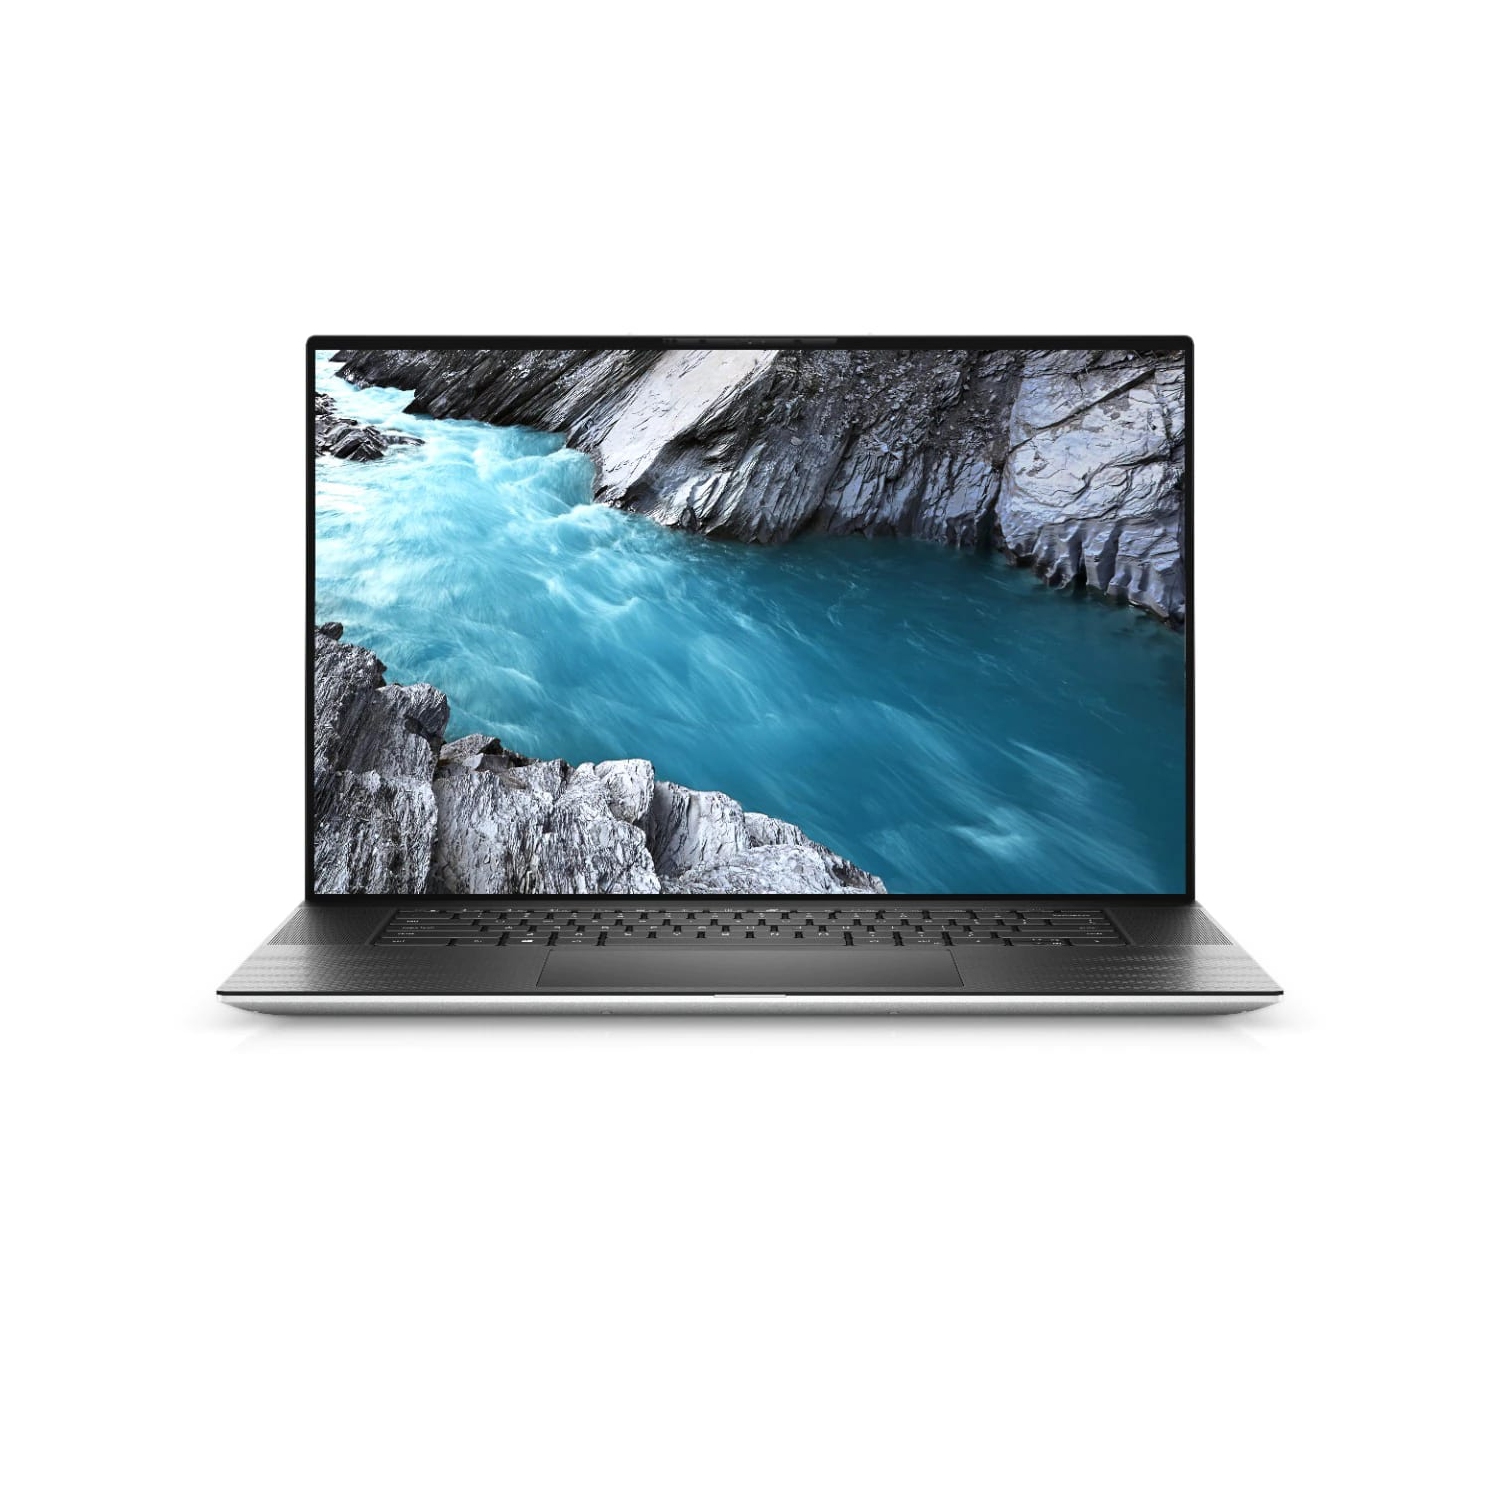 Refurbished (Excellent) - Dell XPS 17 9700 Laptop (2020) | 17" 4K Touch | Core i7 - 2TB SSD - 16GB RAM - RTX 2060 | 8 Cores @ 5.1 GHz - 10th Gen CPU Certified Refurbished